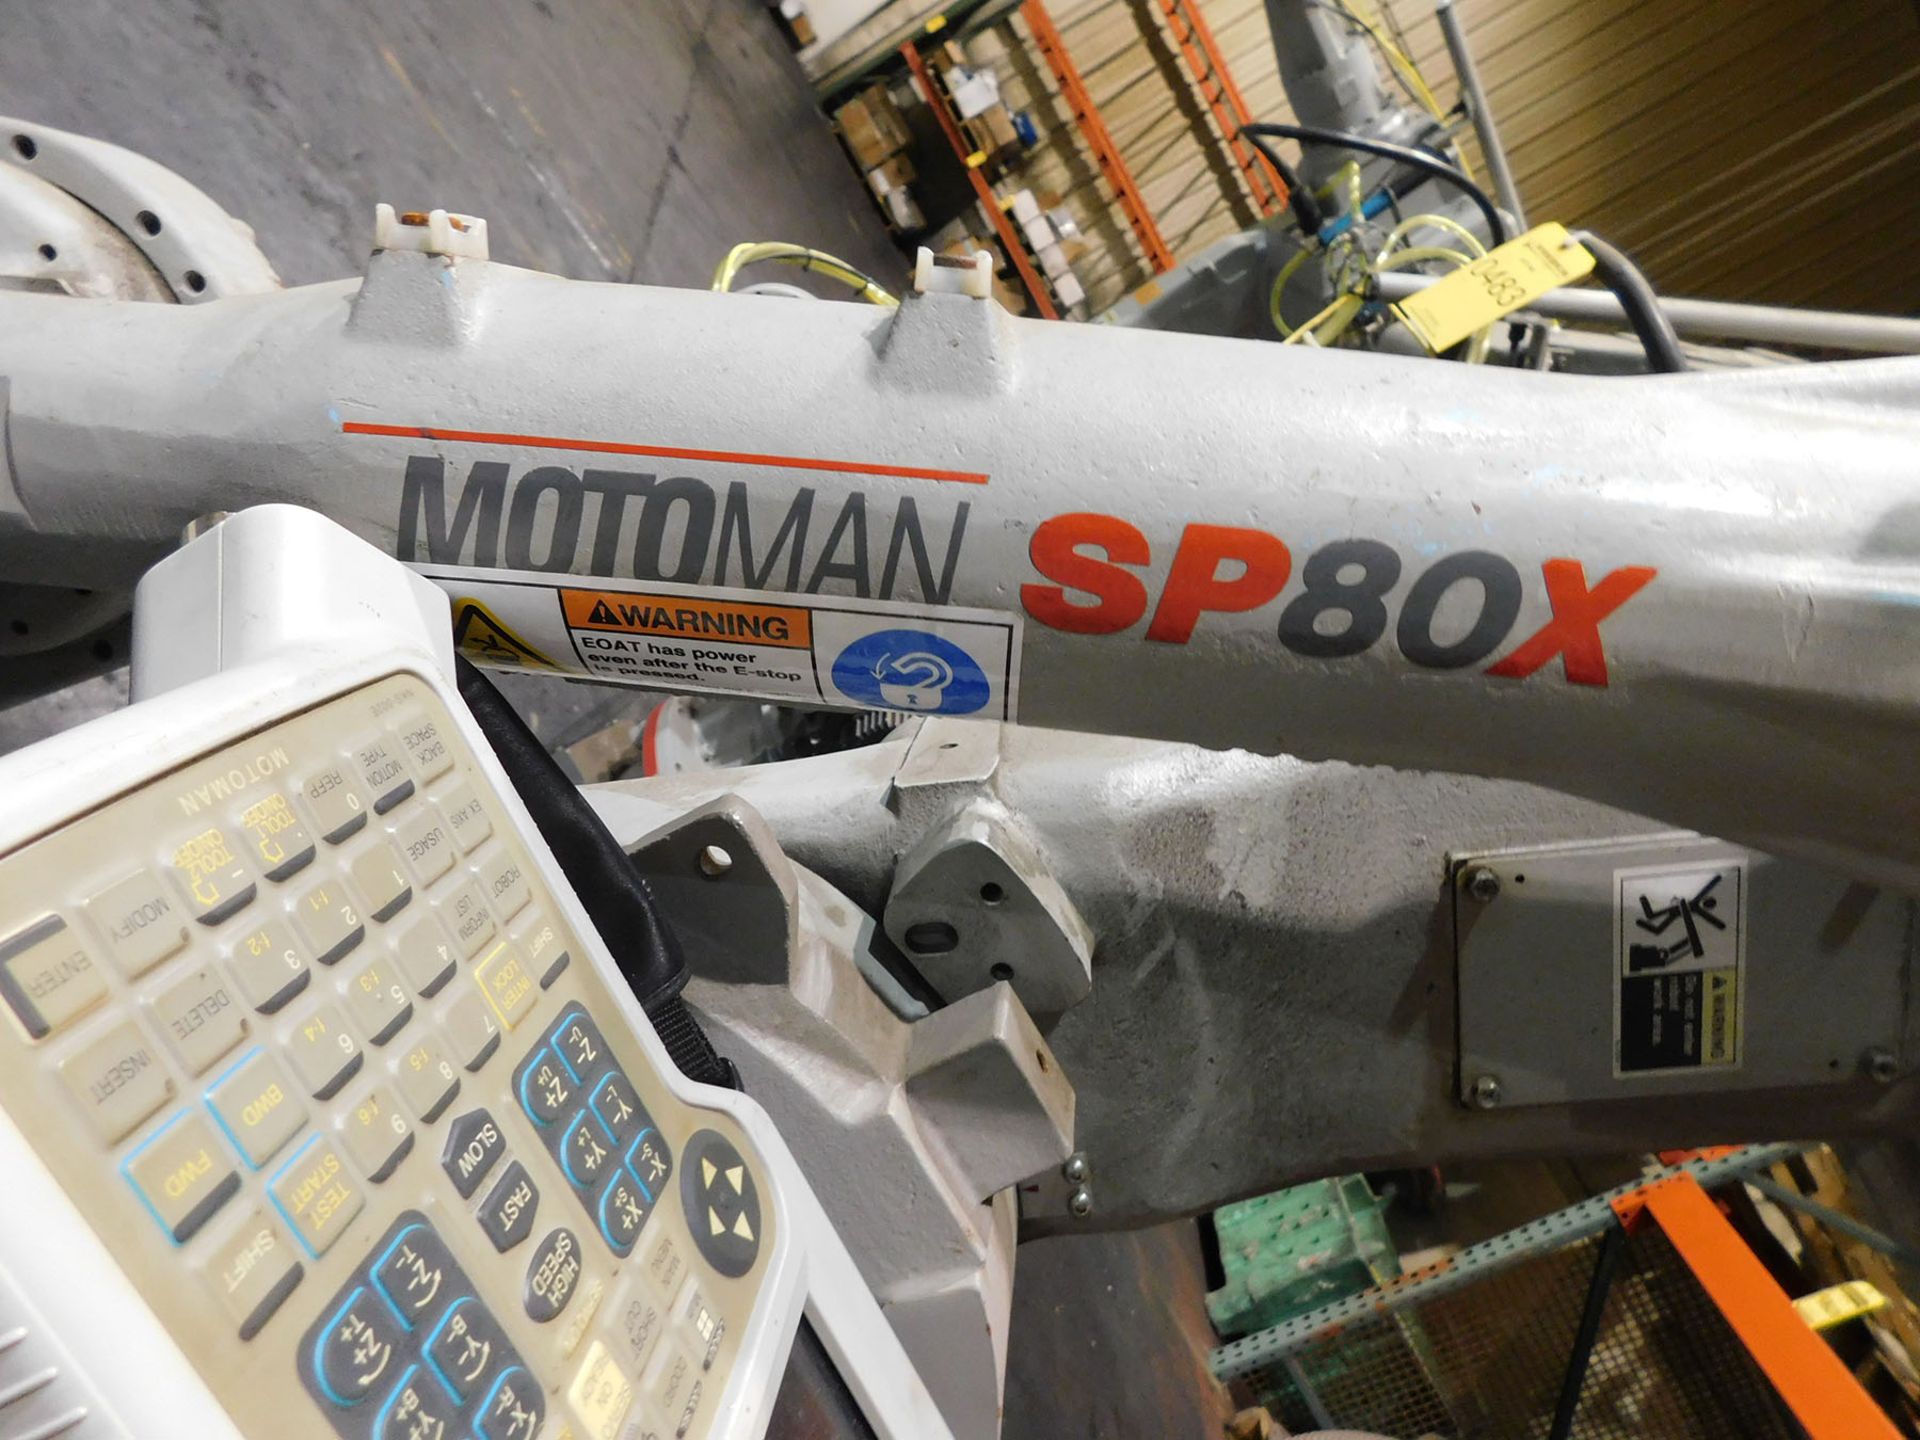 MOTOMAN SP80X ROBOT; S/N S4M092-1-3, 80-KG PAYLOAD, DATE 2004.07 - Image 2 of 4